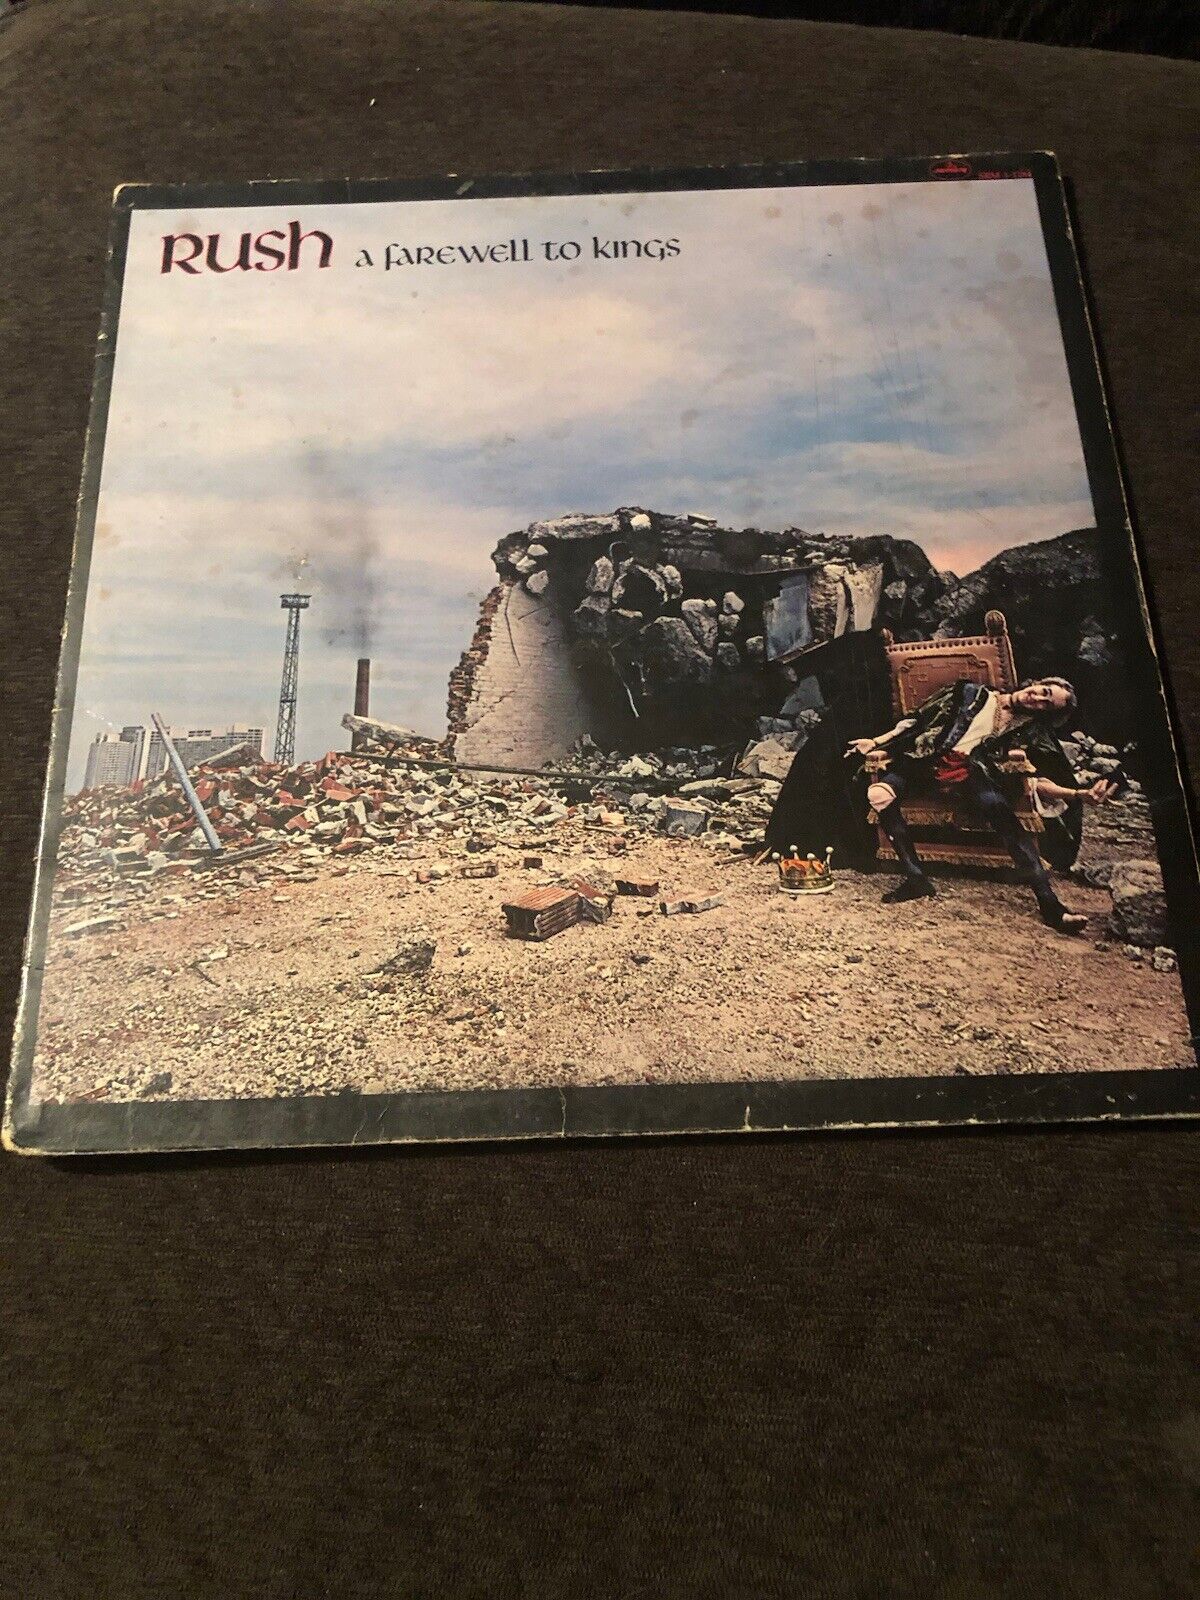 1977 RUSH FAREWELL TO KINGS Picture Sleeve  LP Vinyl Record Vintage Music Album